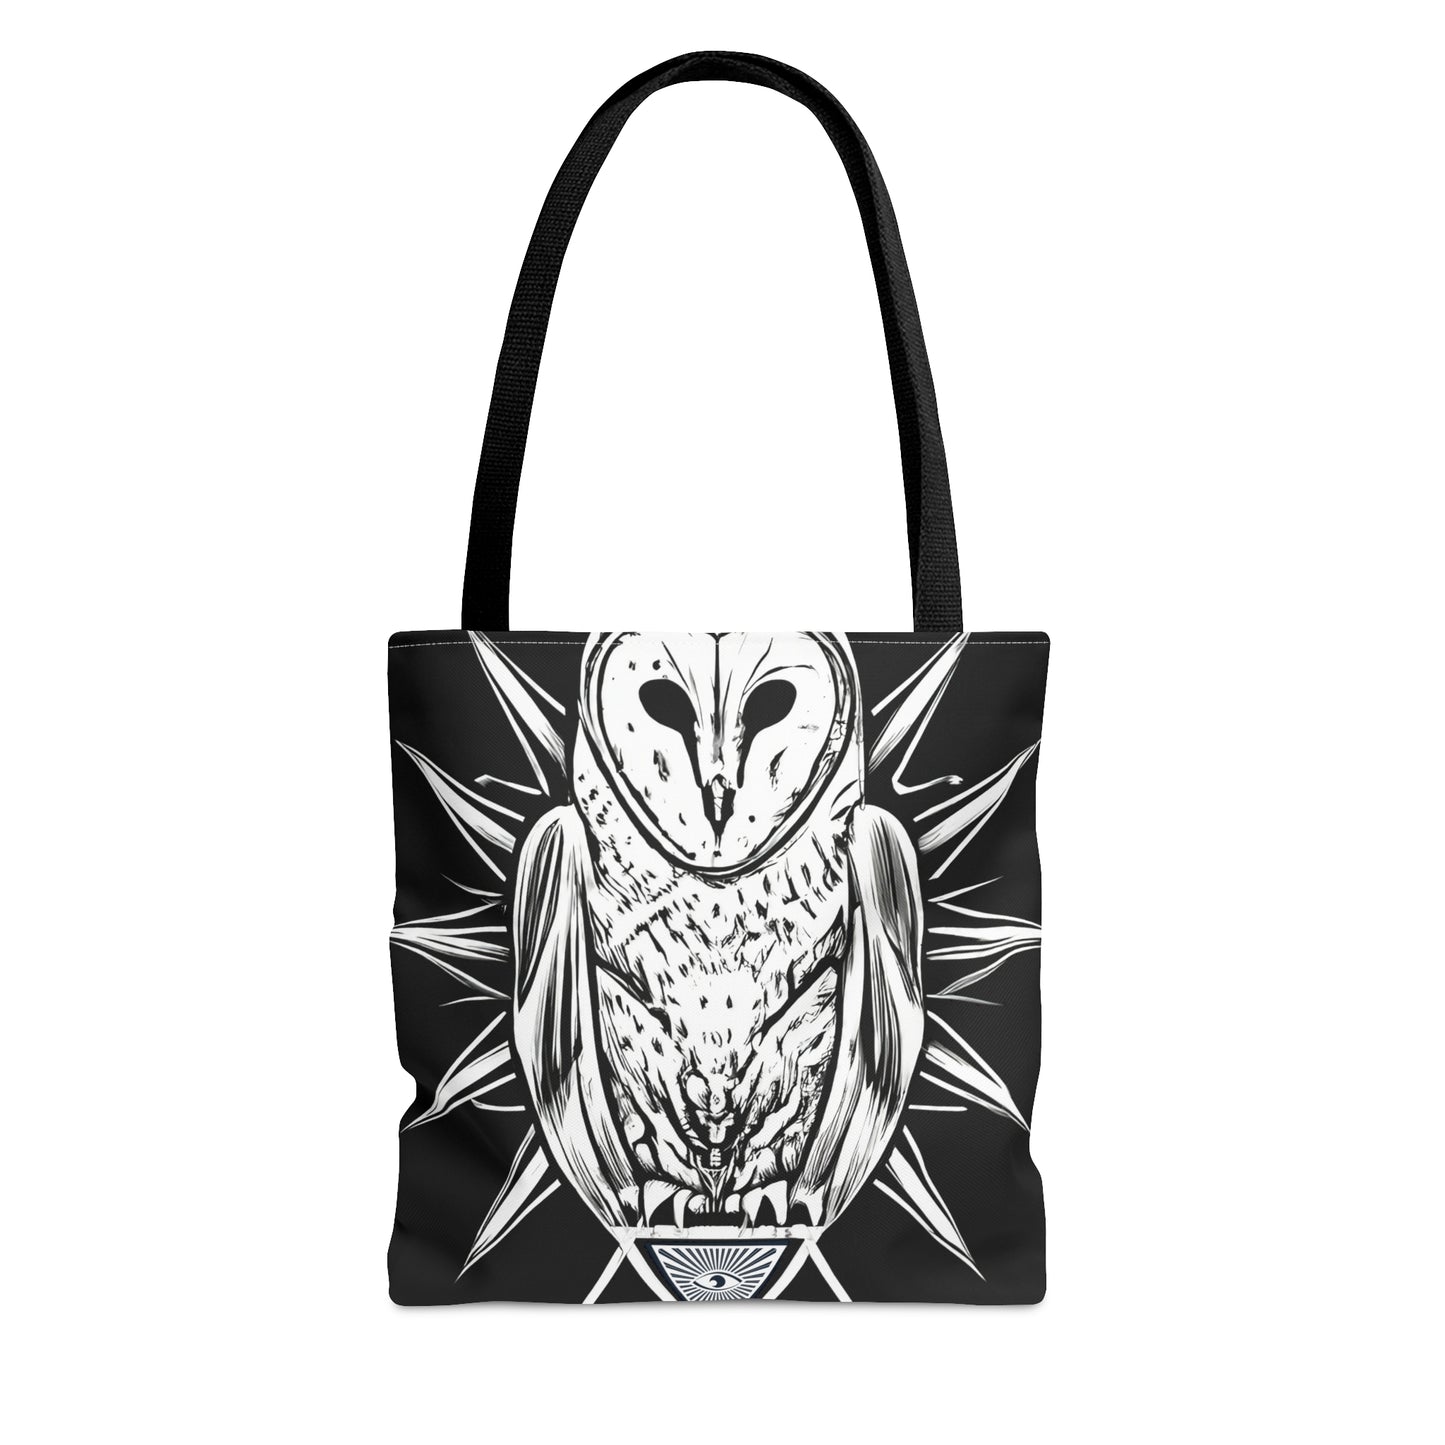 All-Seeing Eye Owl Tote